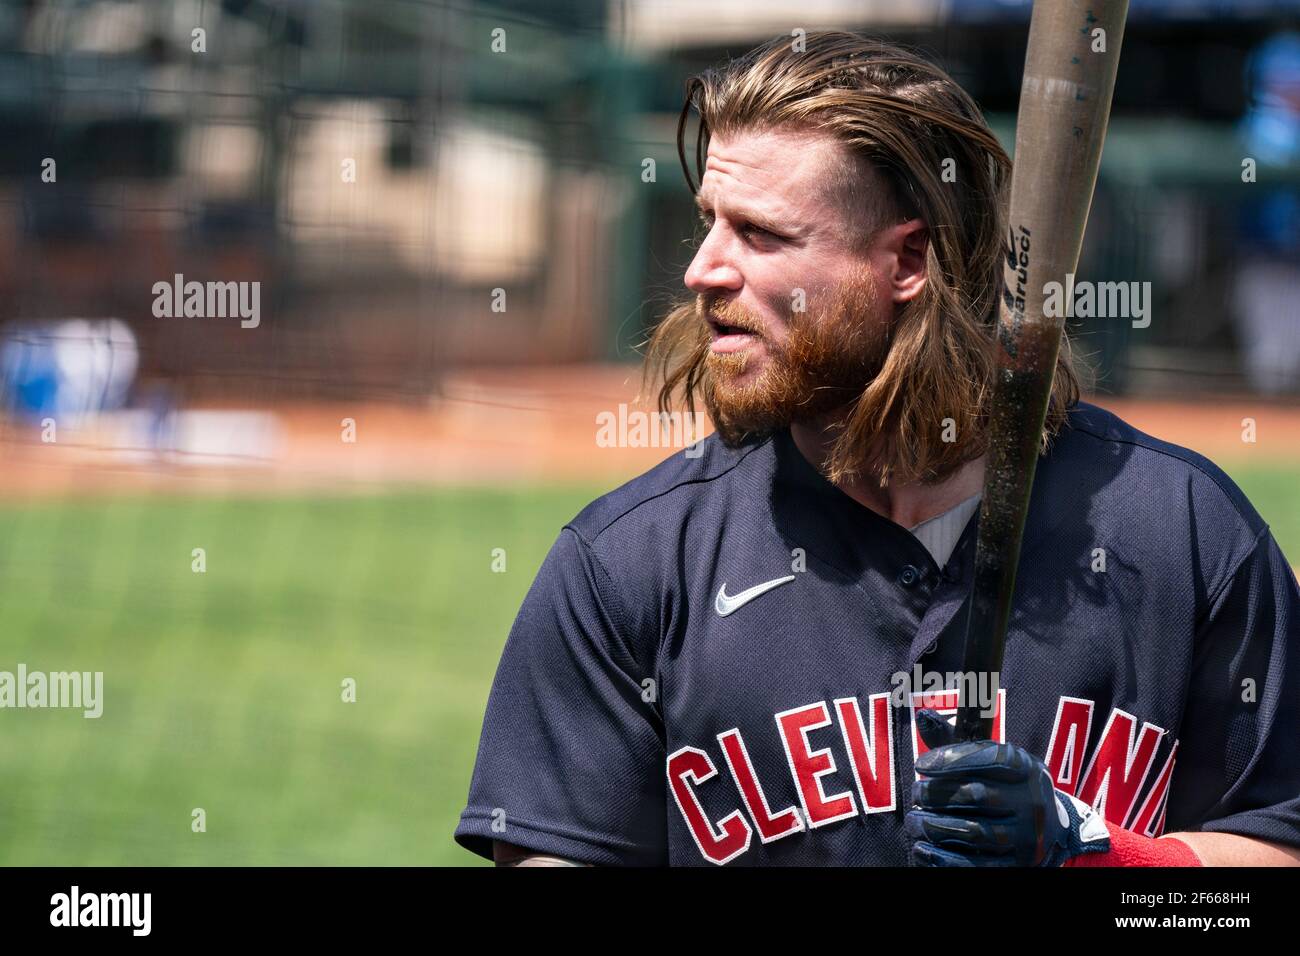 Cleveland Indians right fielder Ben Gamel (28) during a spring training game against the Kansas City Royals, Sunday, March 29, 2021, in Phoenix, AZ. T Stock Photo